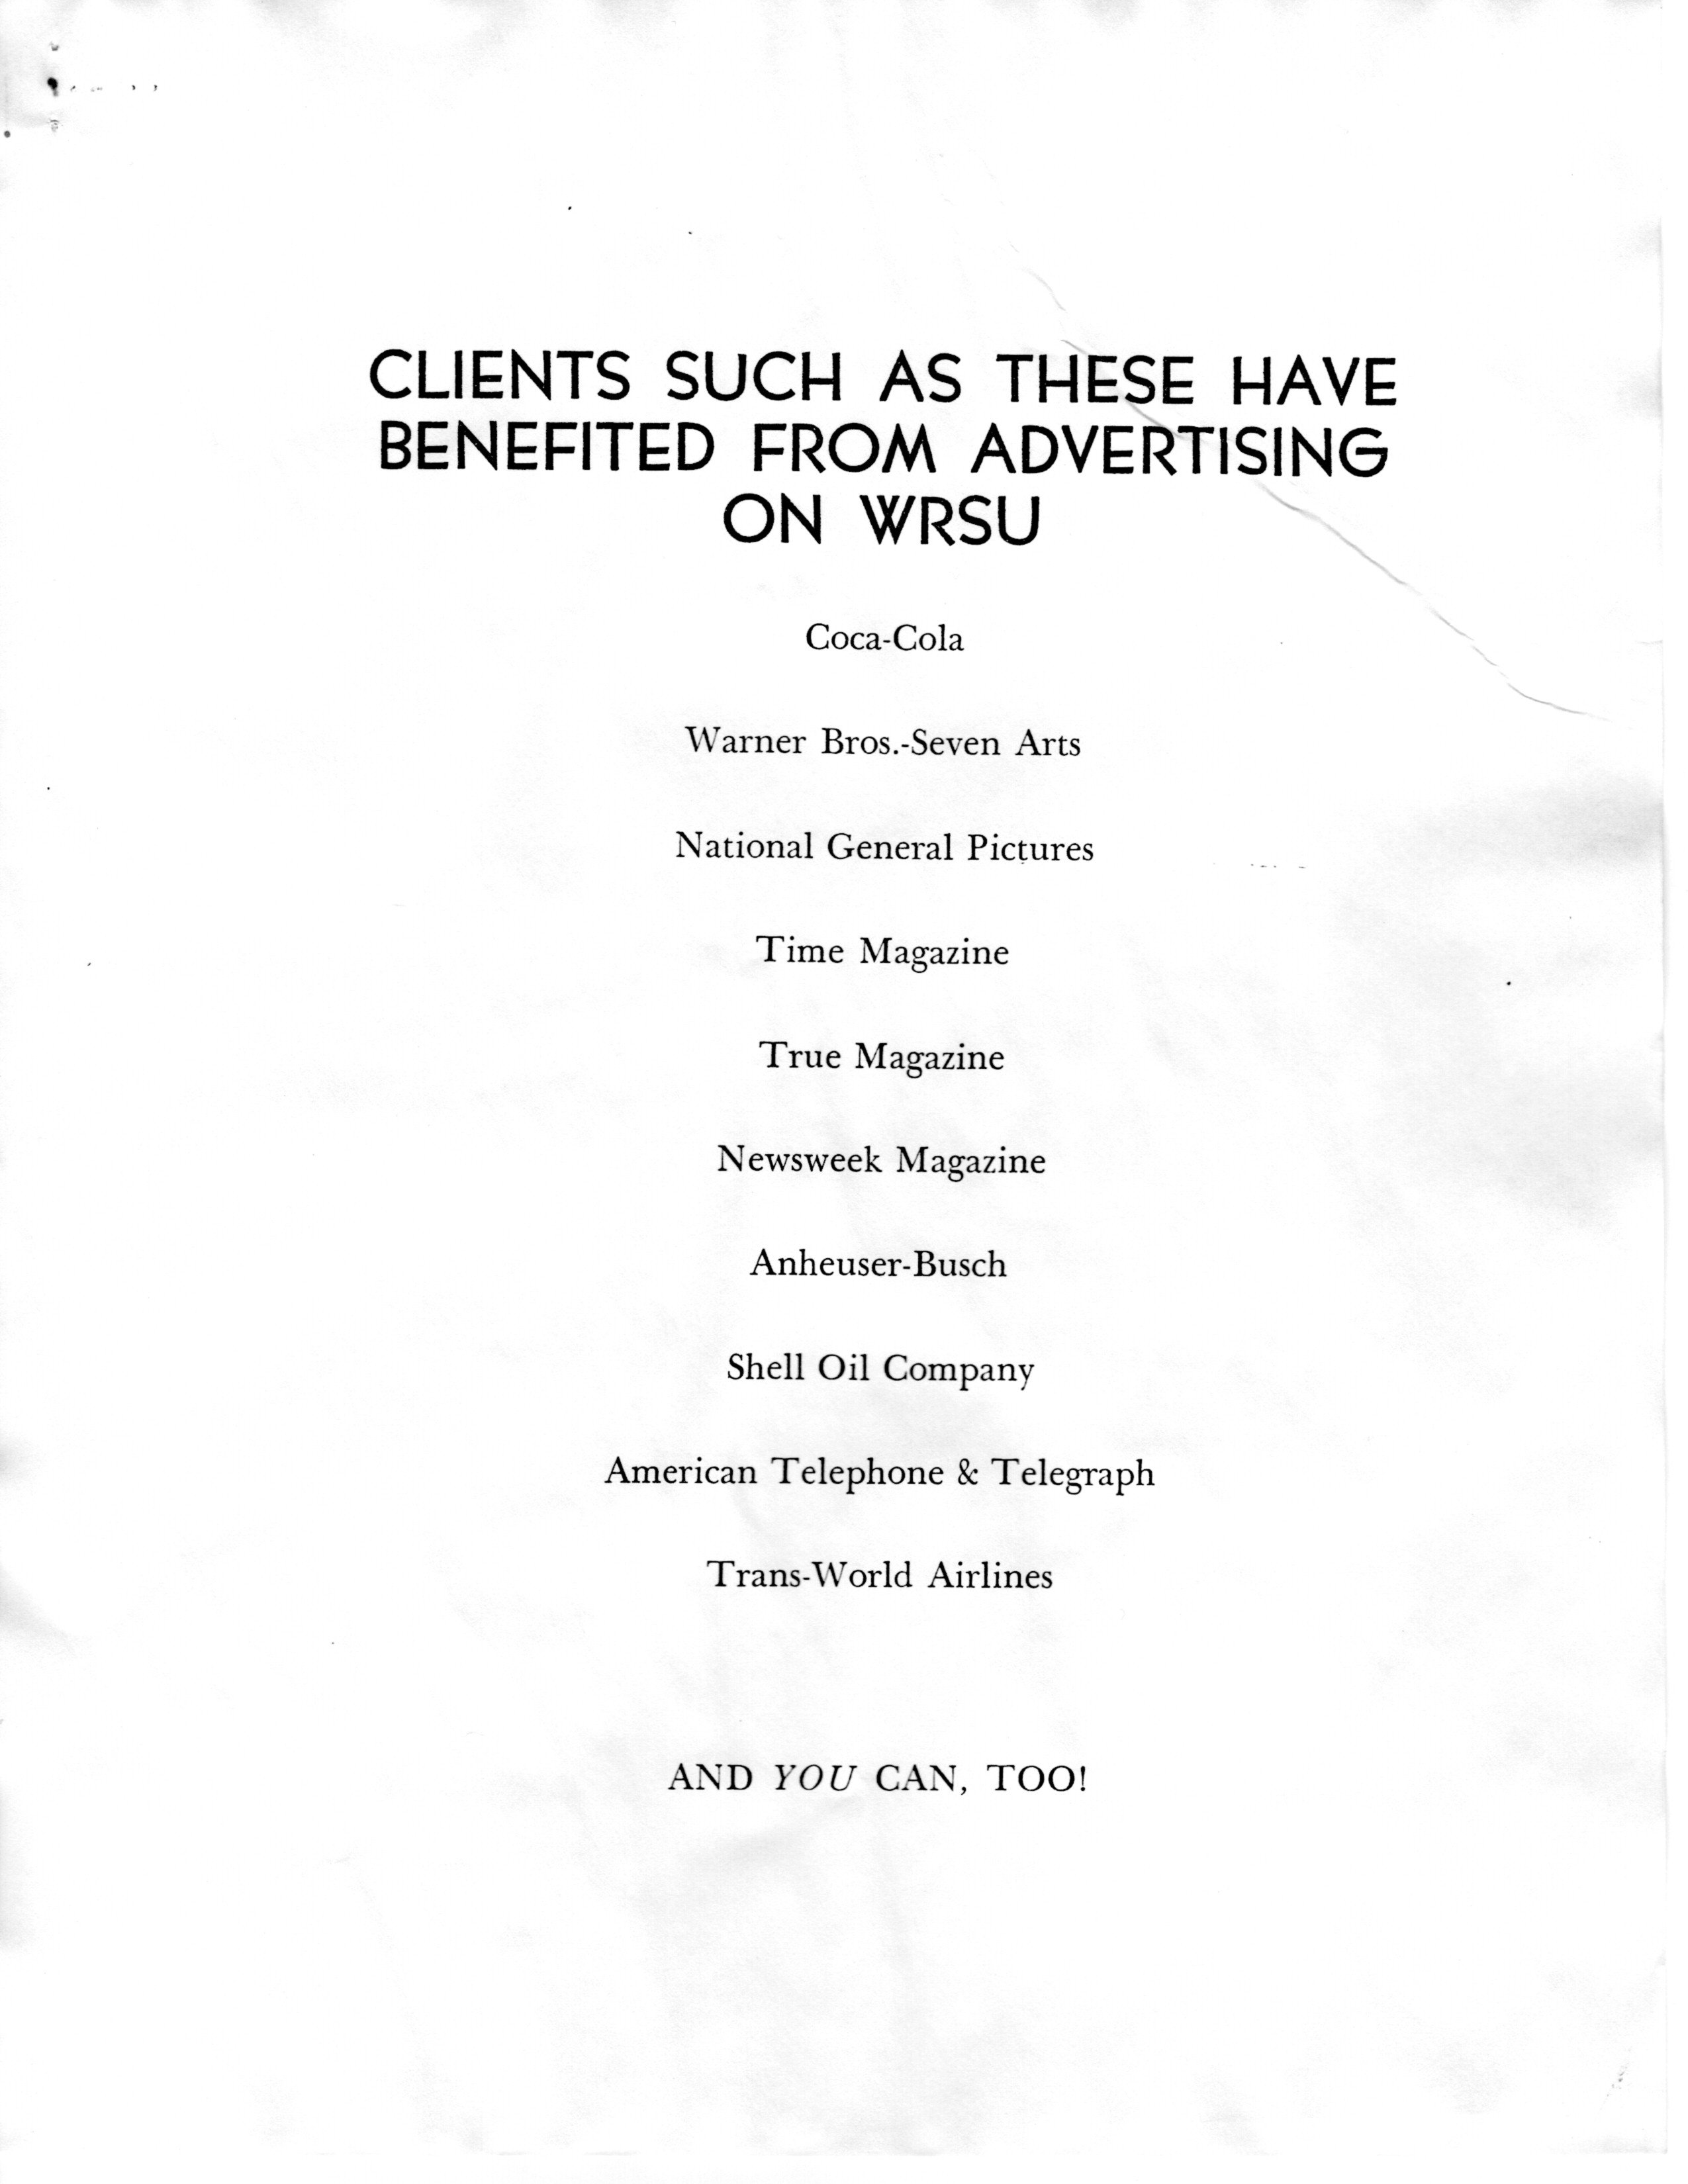 1969 Why advertise on WRSU? Read and be educated for 1969.